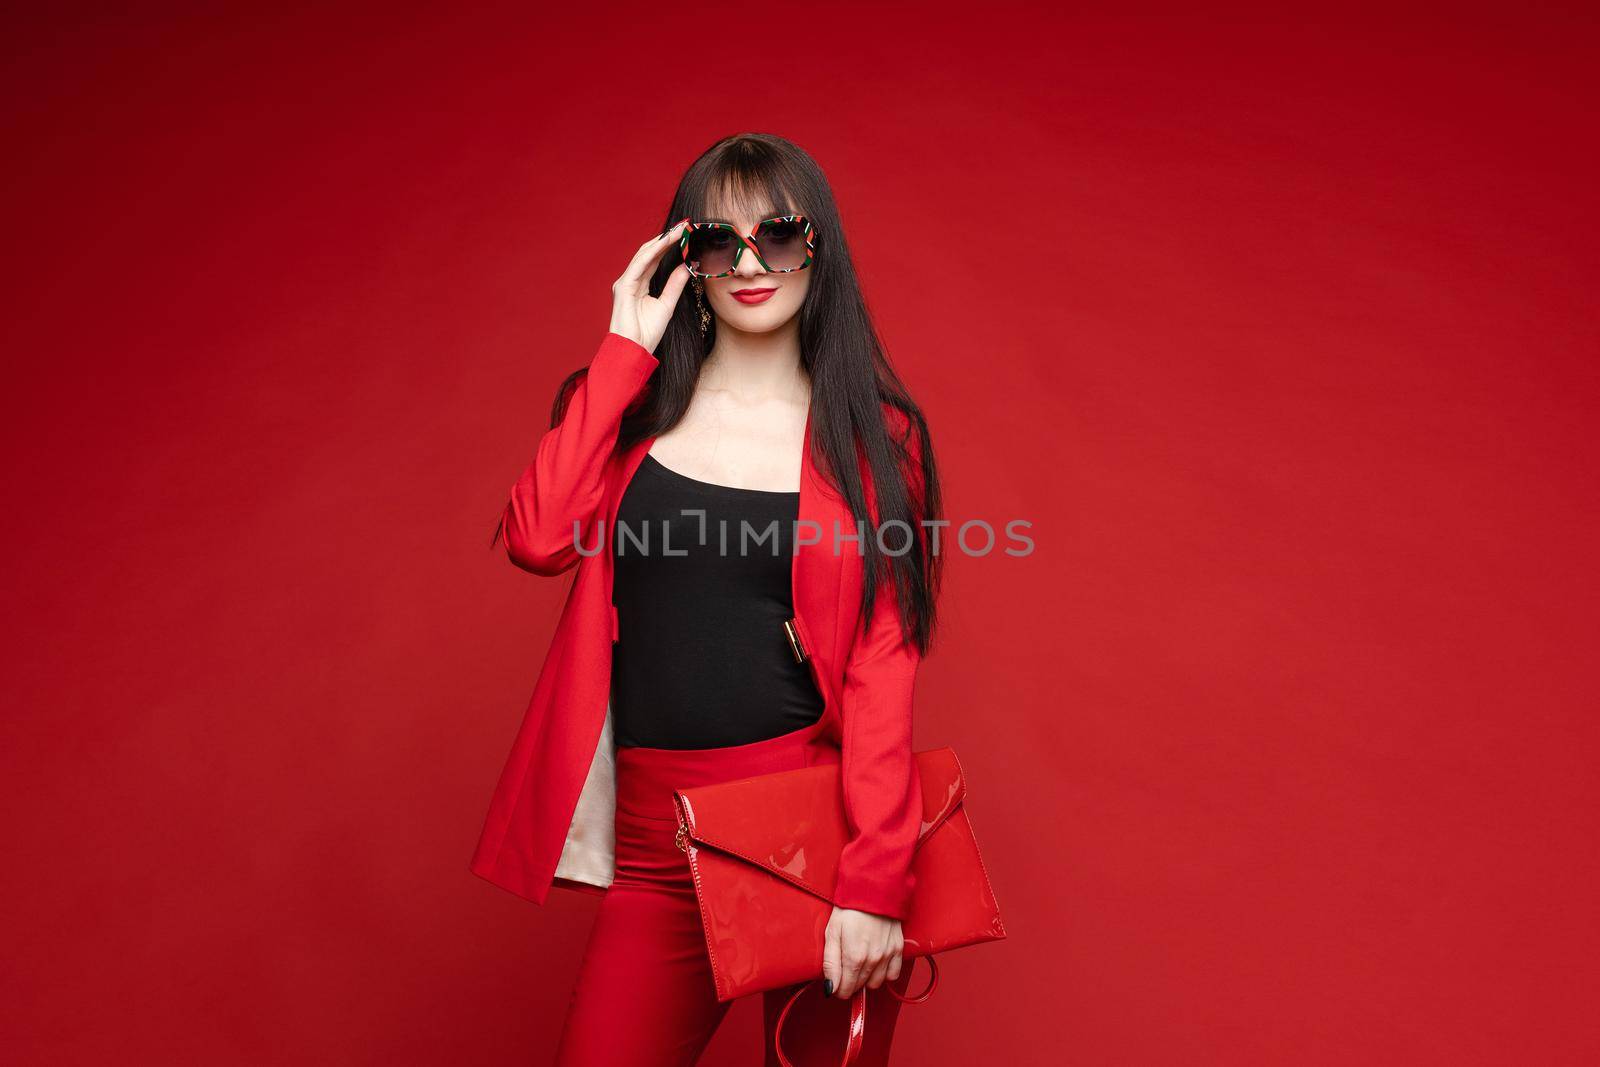 Side view of glamorous brunette posing in red smart suit and heels on red isolated background in studio. Young woman keeping glasses in hand and looking down. Concept of beauty and fashion.